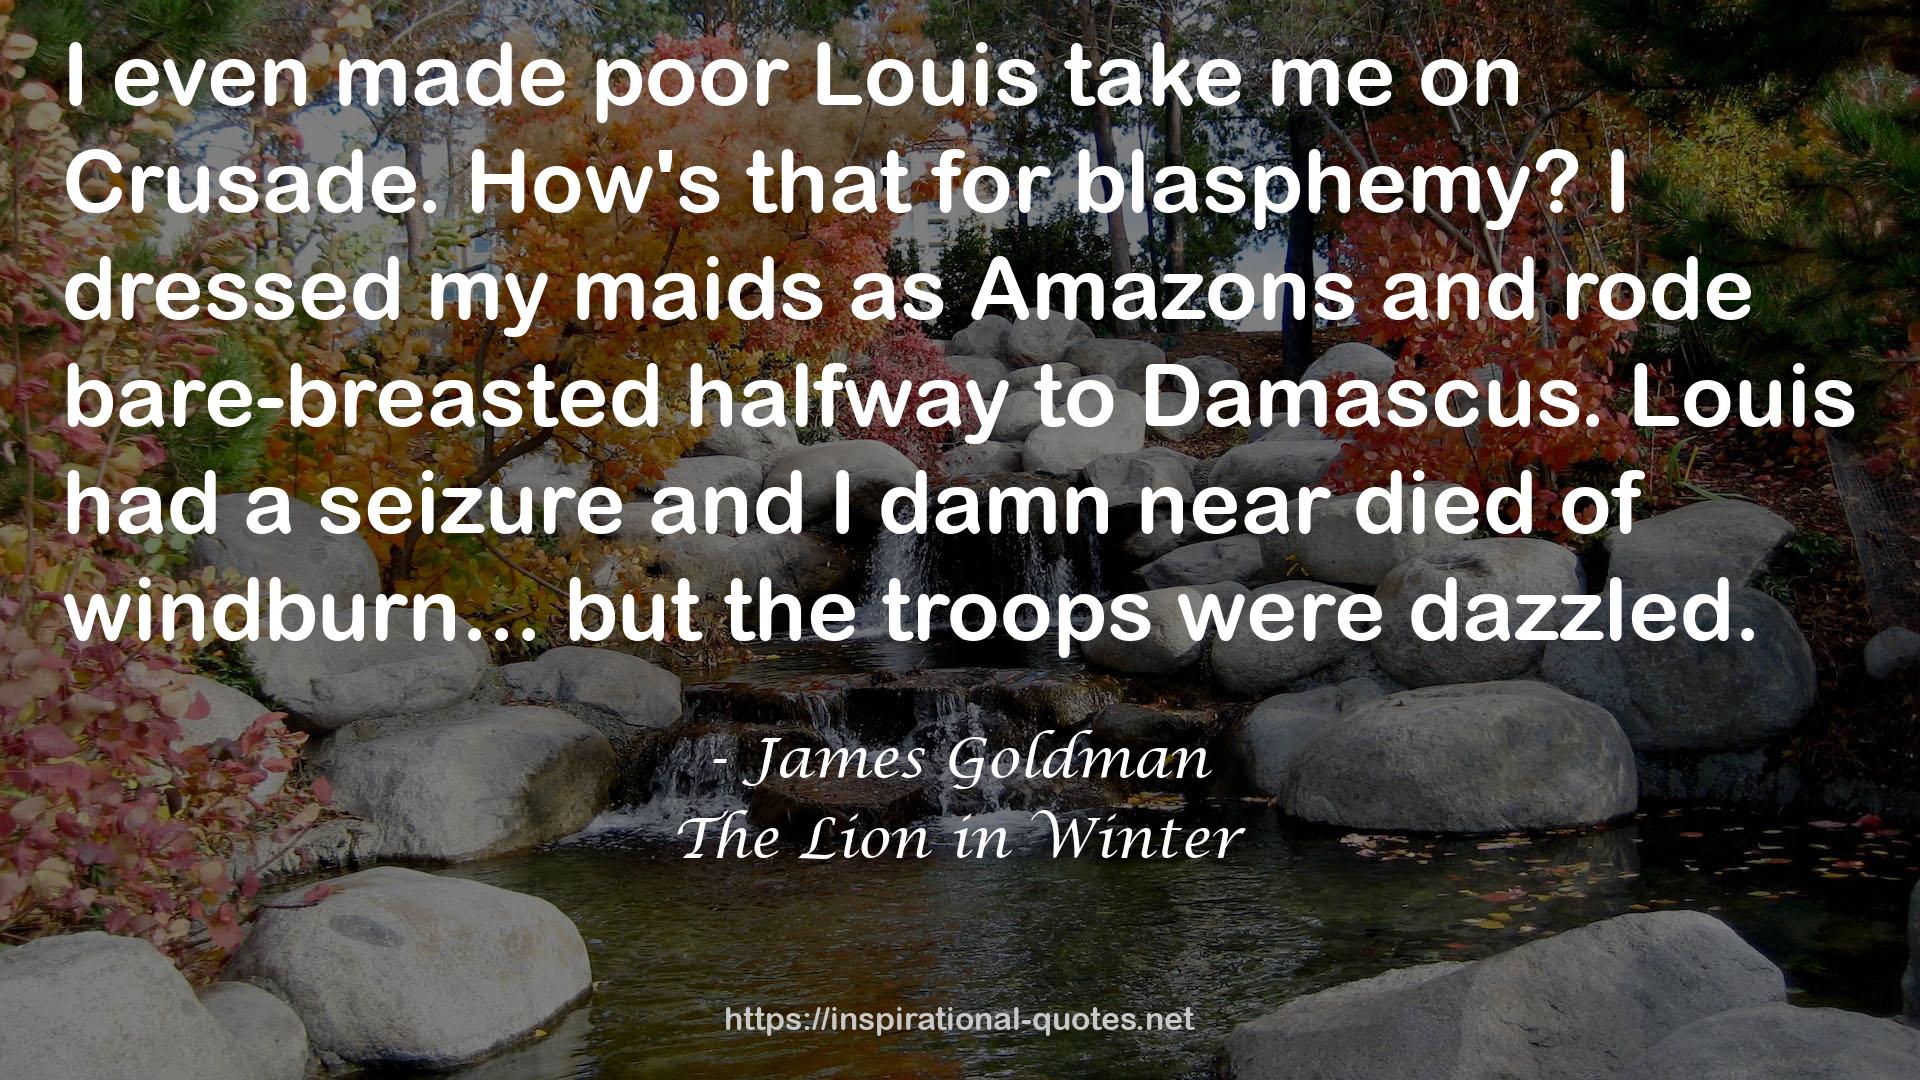 The Lion in Winter QUOTES